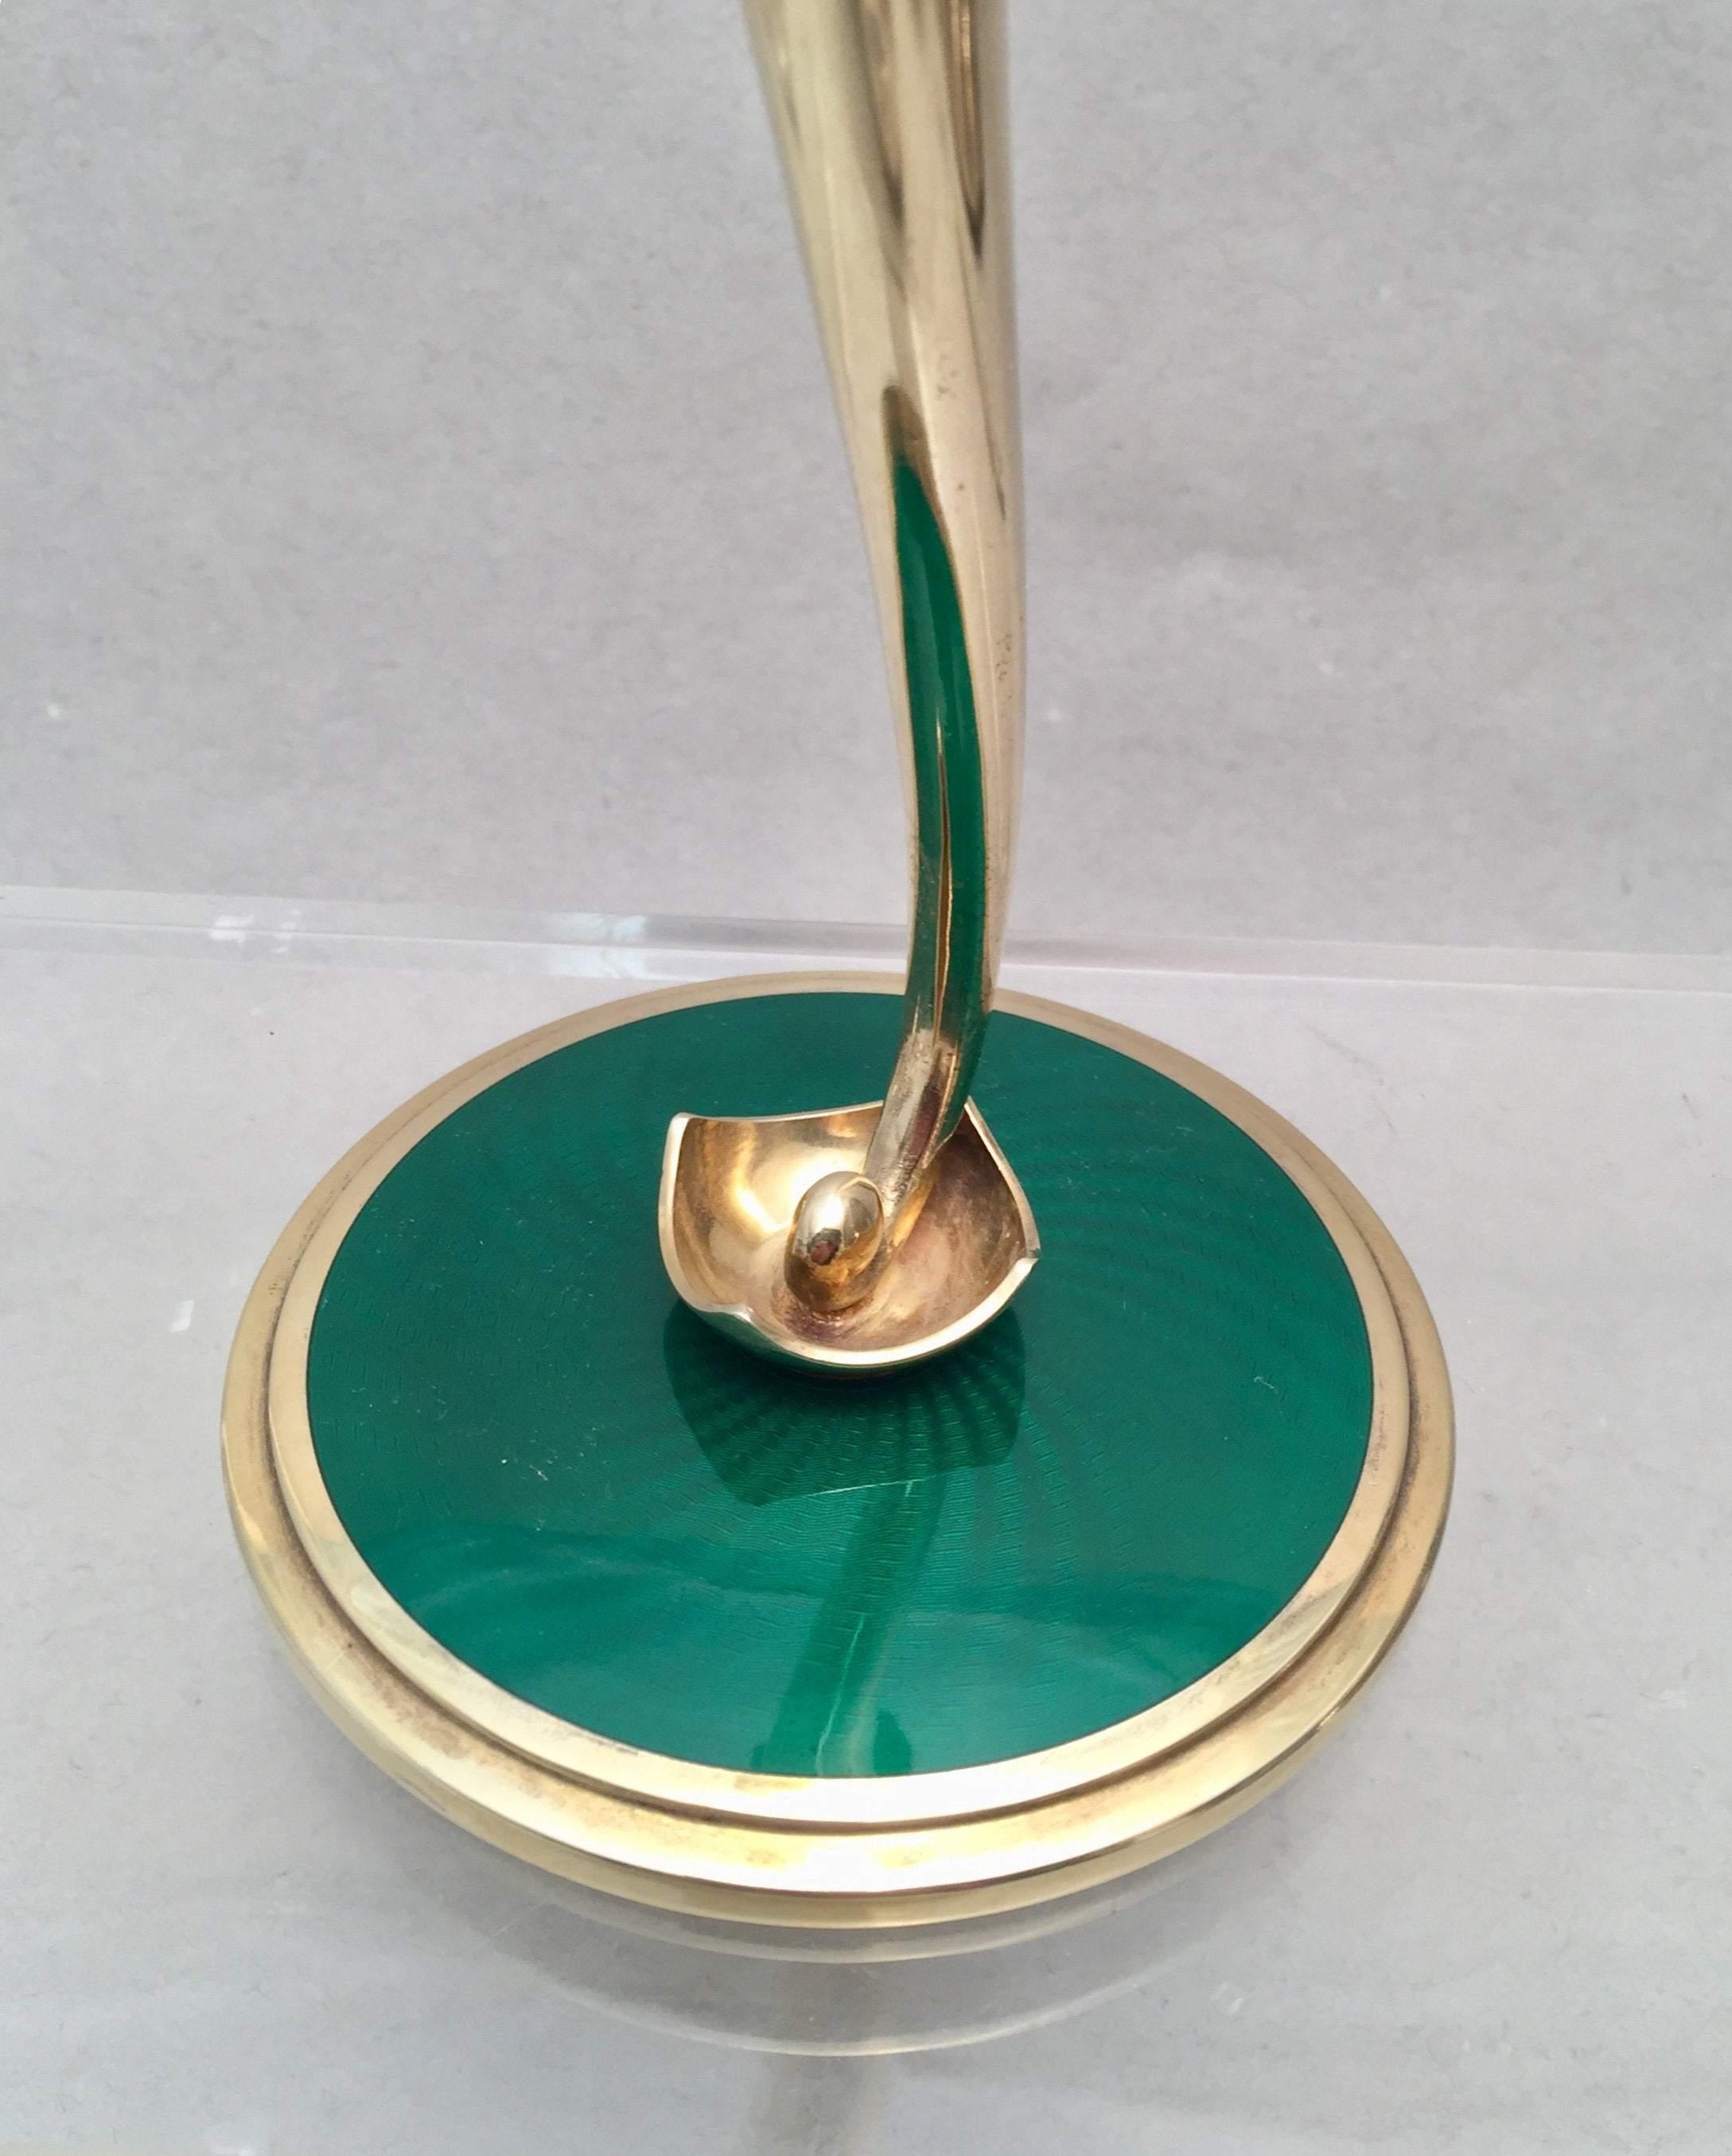 Gilt sterling silver vase by Norwegian maker J. Tostrup. Designed in trumpet form with flower like spout and stem. The green enamel base is in stepped form. Measuring 8 inches tall and 3 3/4 inches in diameter at base. Bearing hallmarks as